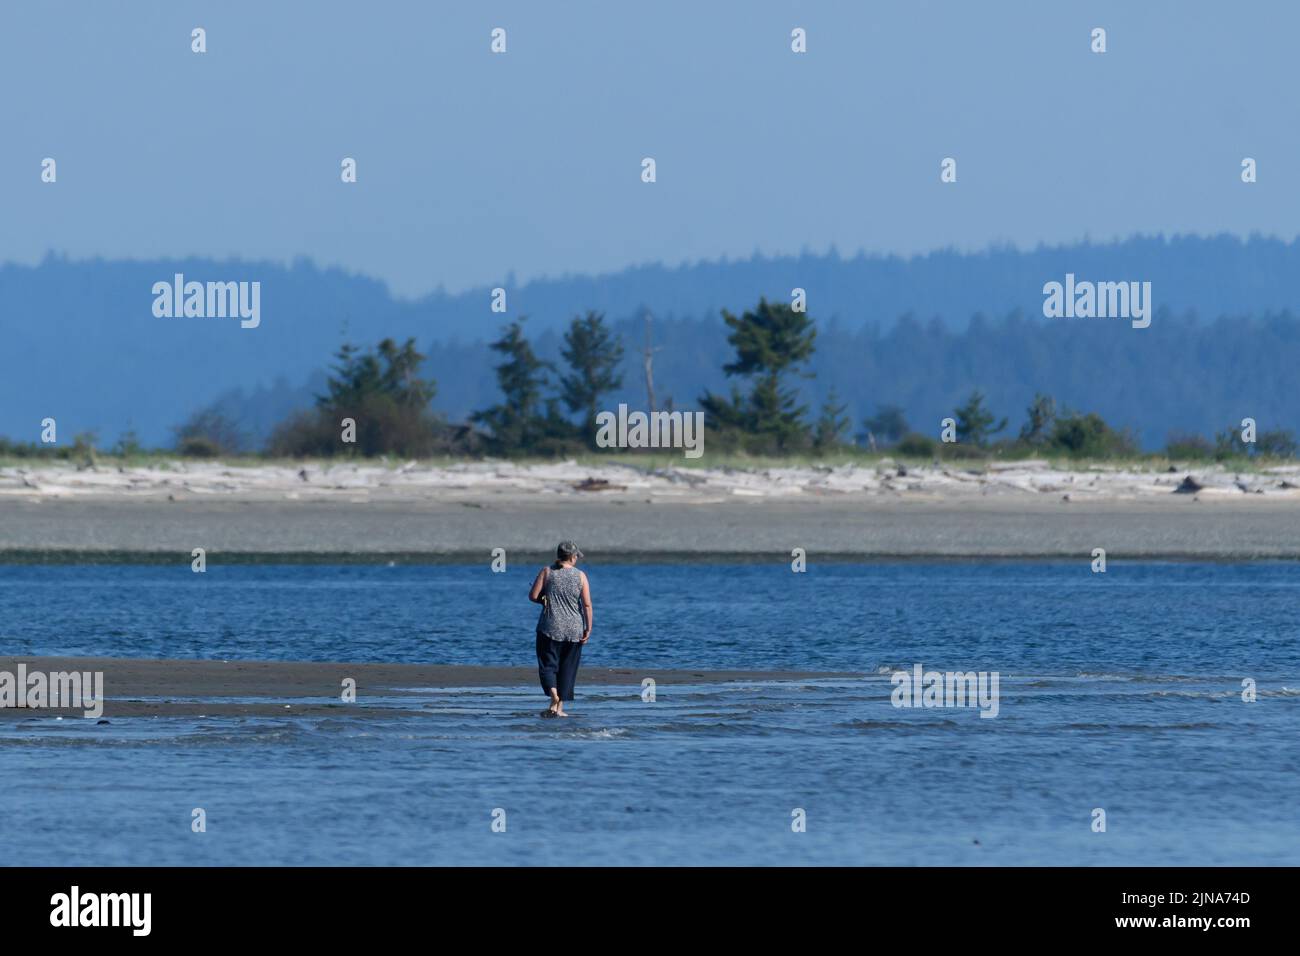 Rear view of a woman walking ankle deep in ocean, British Columbia, Canada Stock Photo